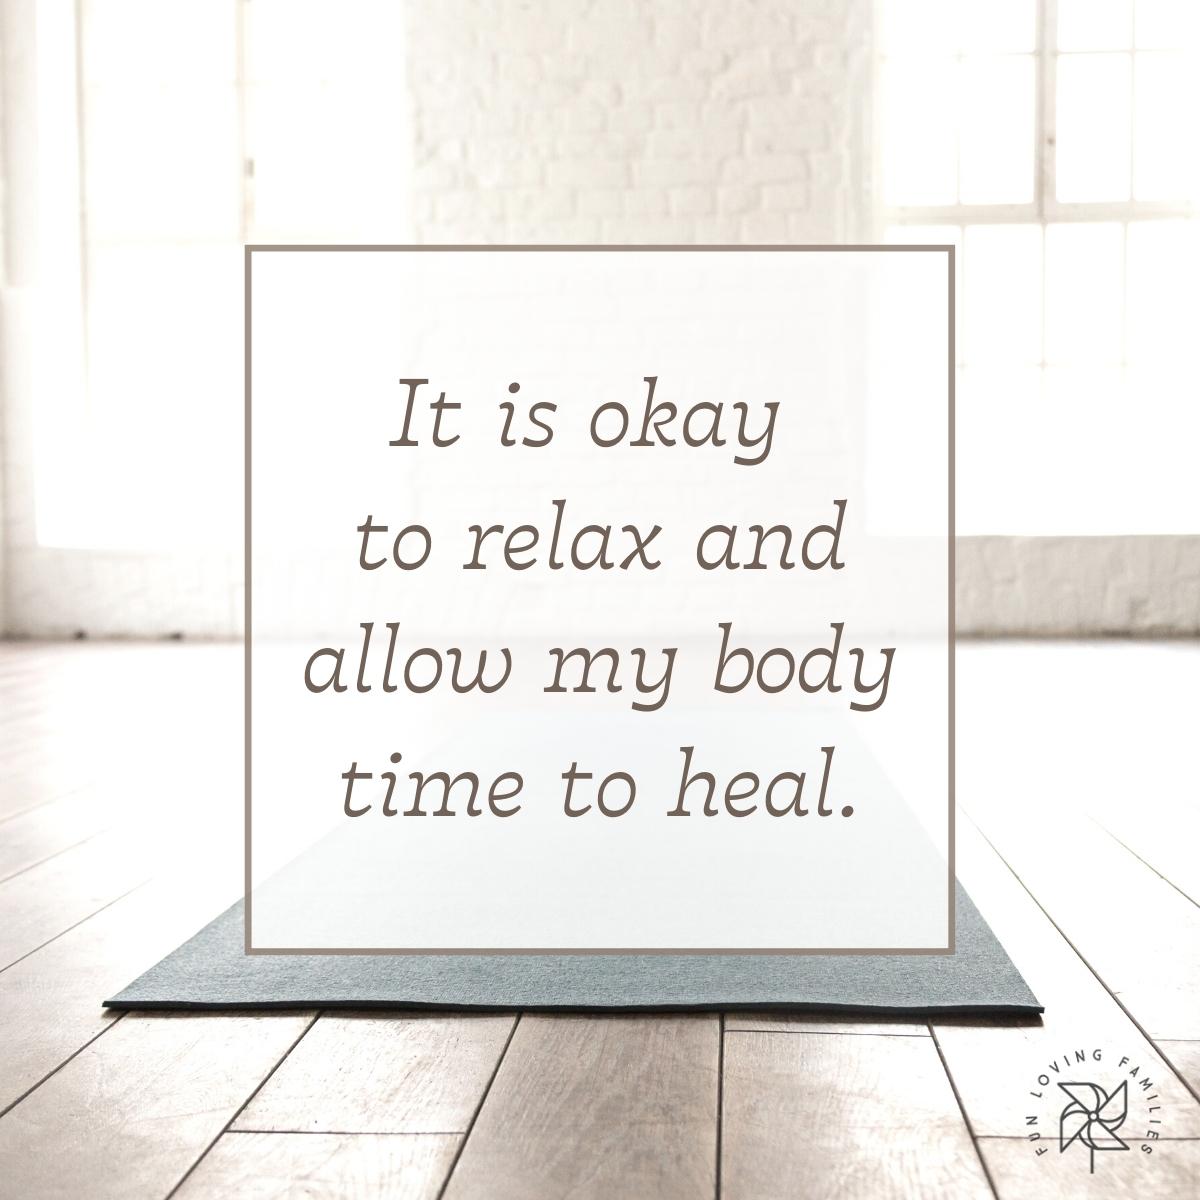 It is okay to relax and allow my body time to heal affirmation